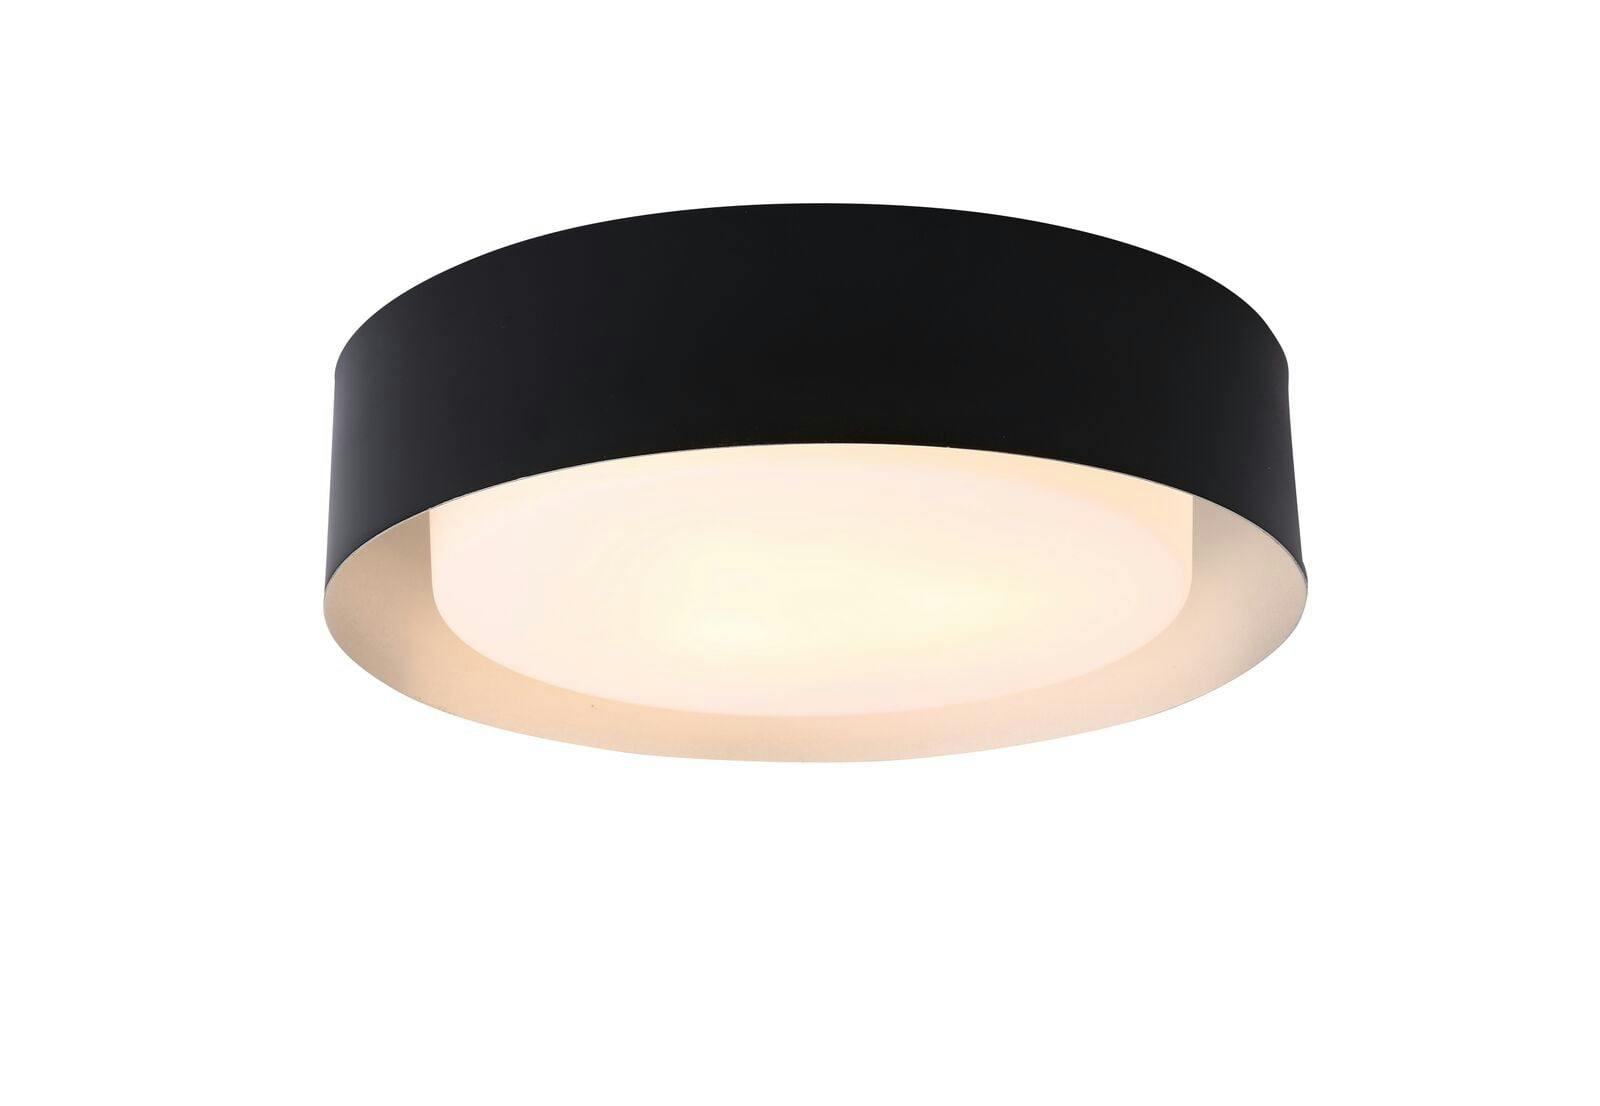 Modern Black and Silver 15.75" Frosted Glass Flush Mount Ceiling Light